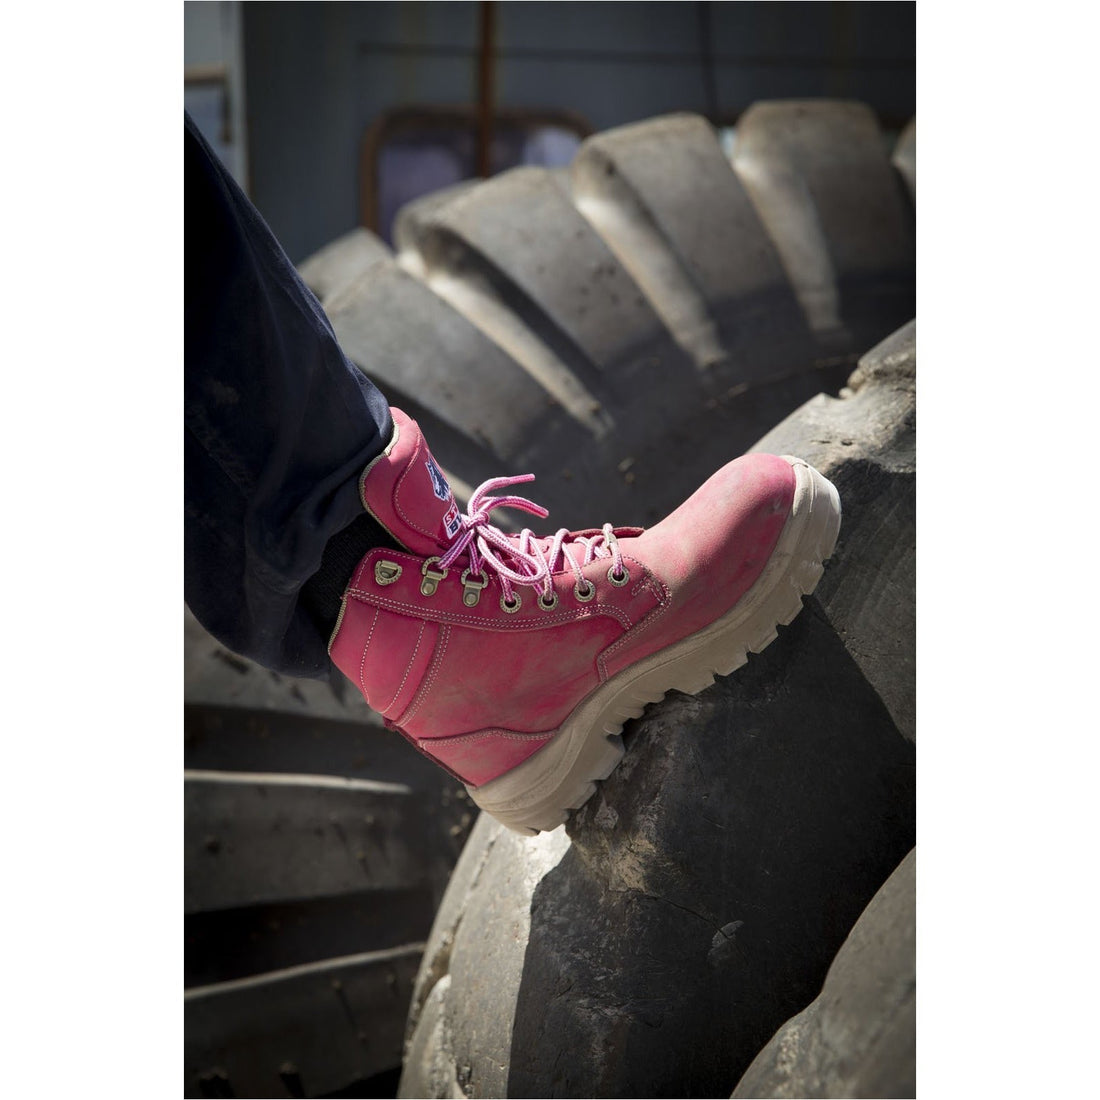 Steel Blue Women's Zip Sided Safety Boots Southern Cross S3 - PINK - BIG Boots UK